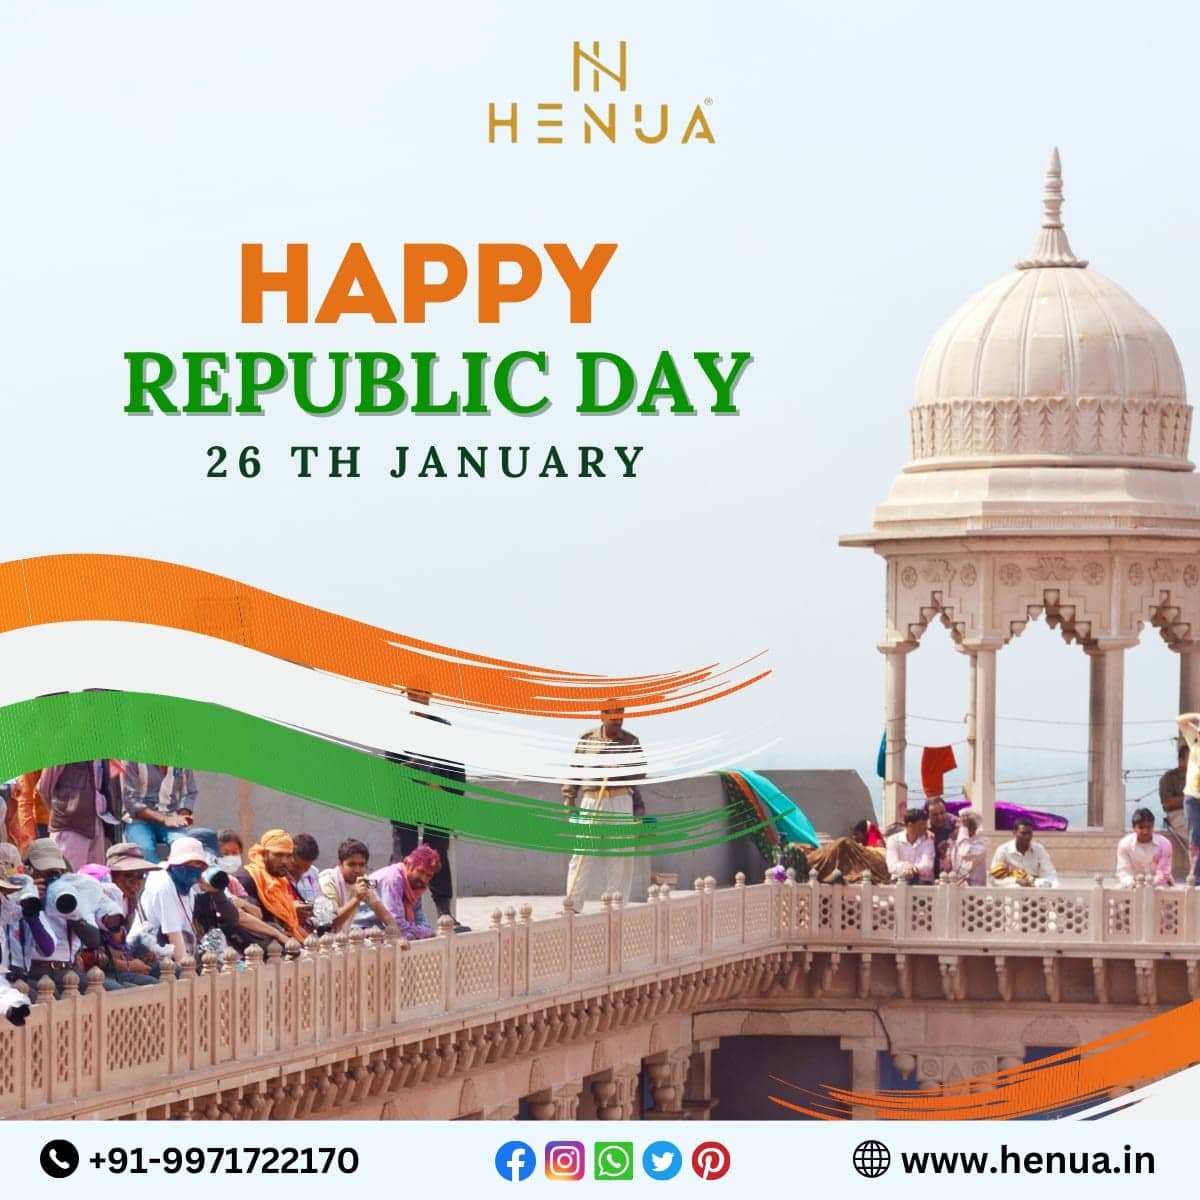 We-Wish-You-All-A-Very-Happy-Republic-Day-2023